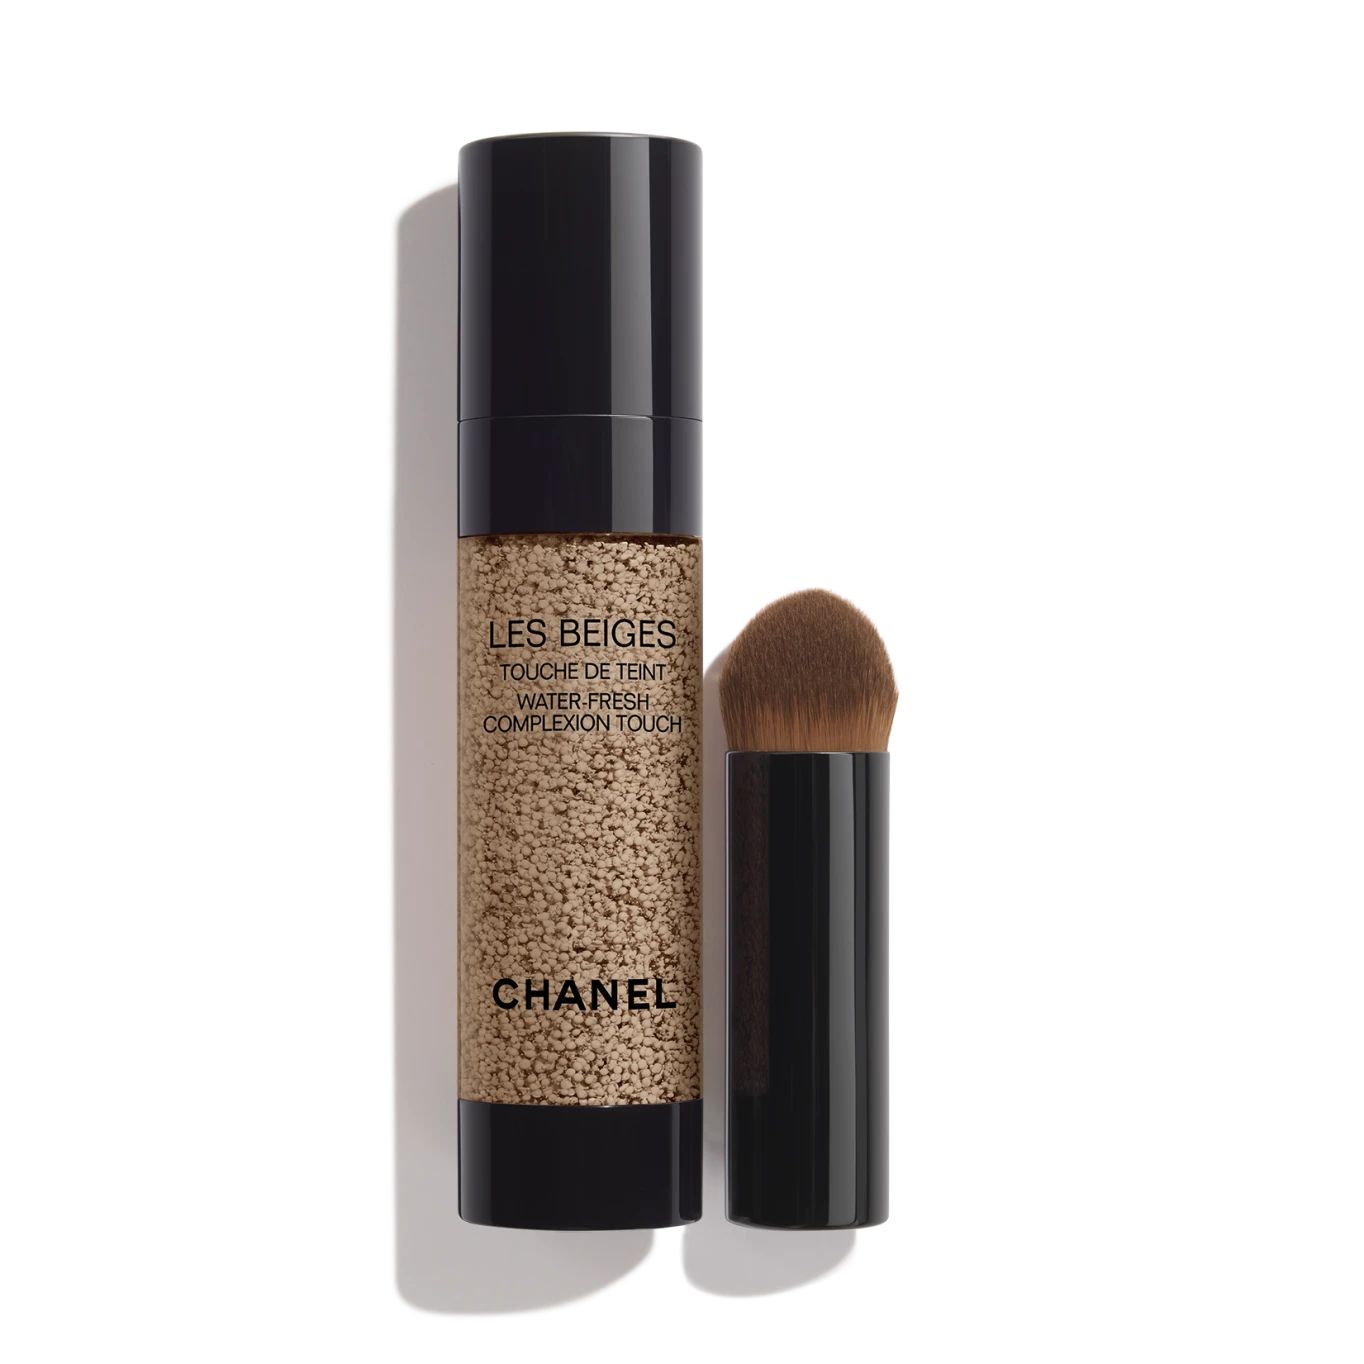 LES BEIGES

            
            Water-Fresh Complexion Touch | Chanel, Inc. (US)